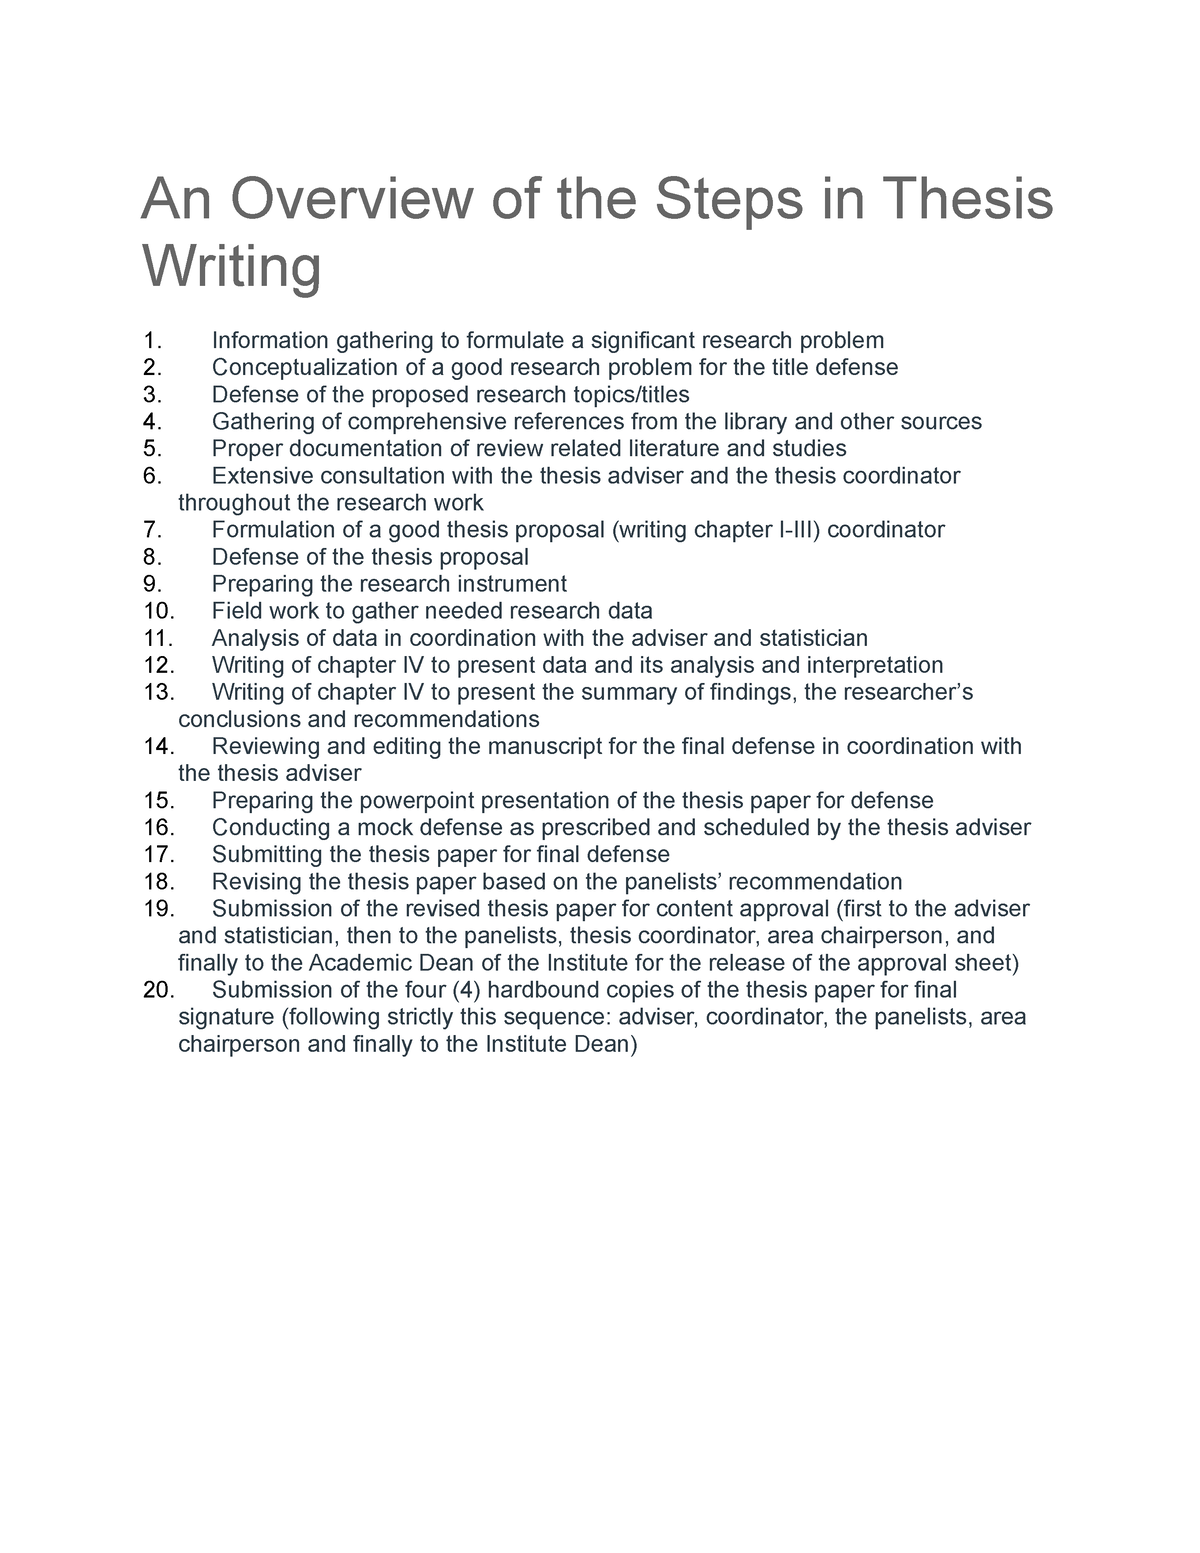 steps in thesis writing pdf